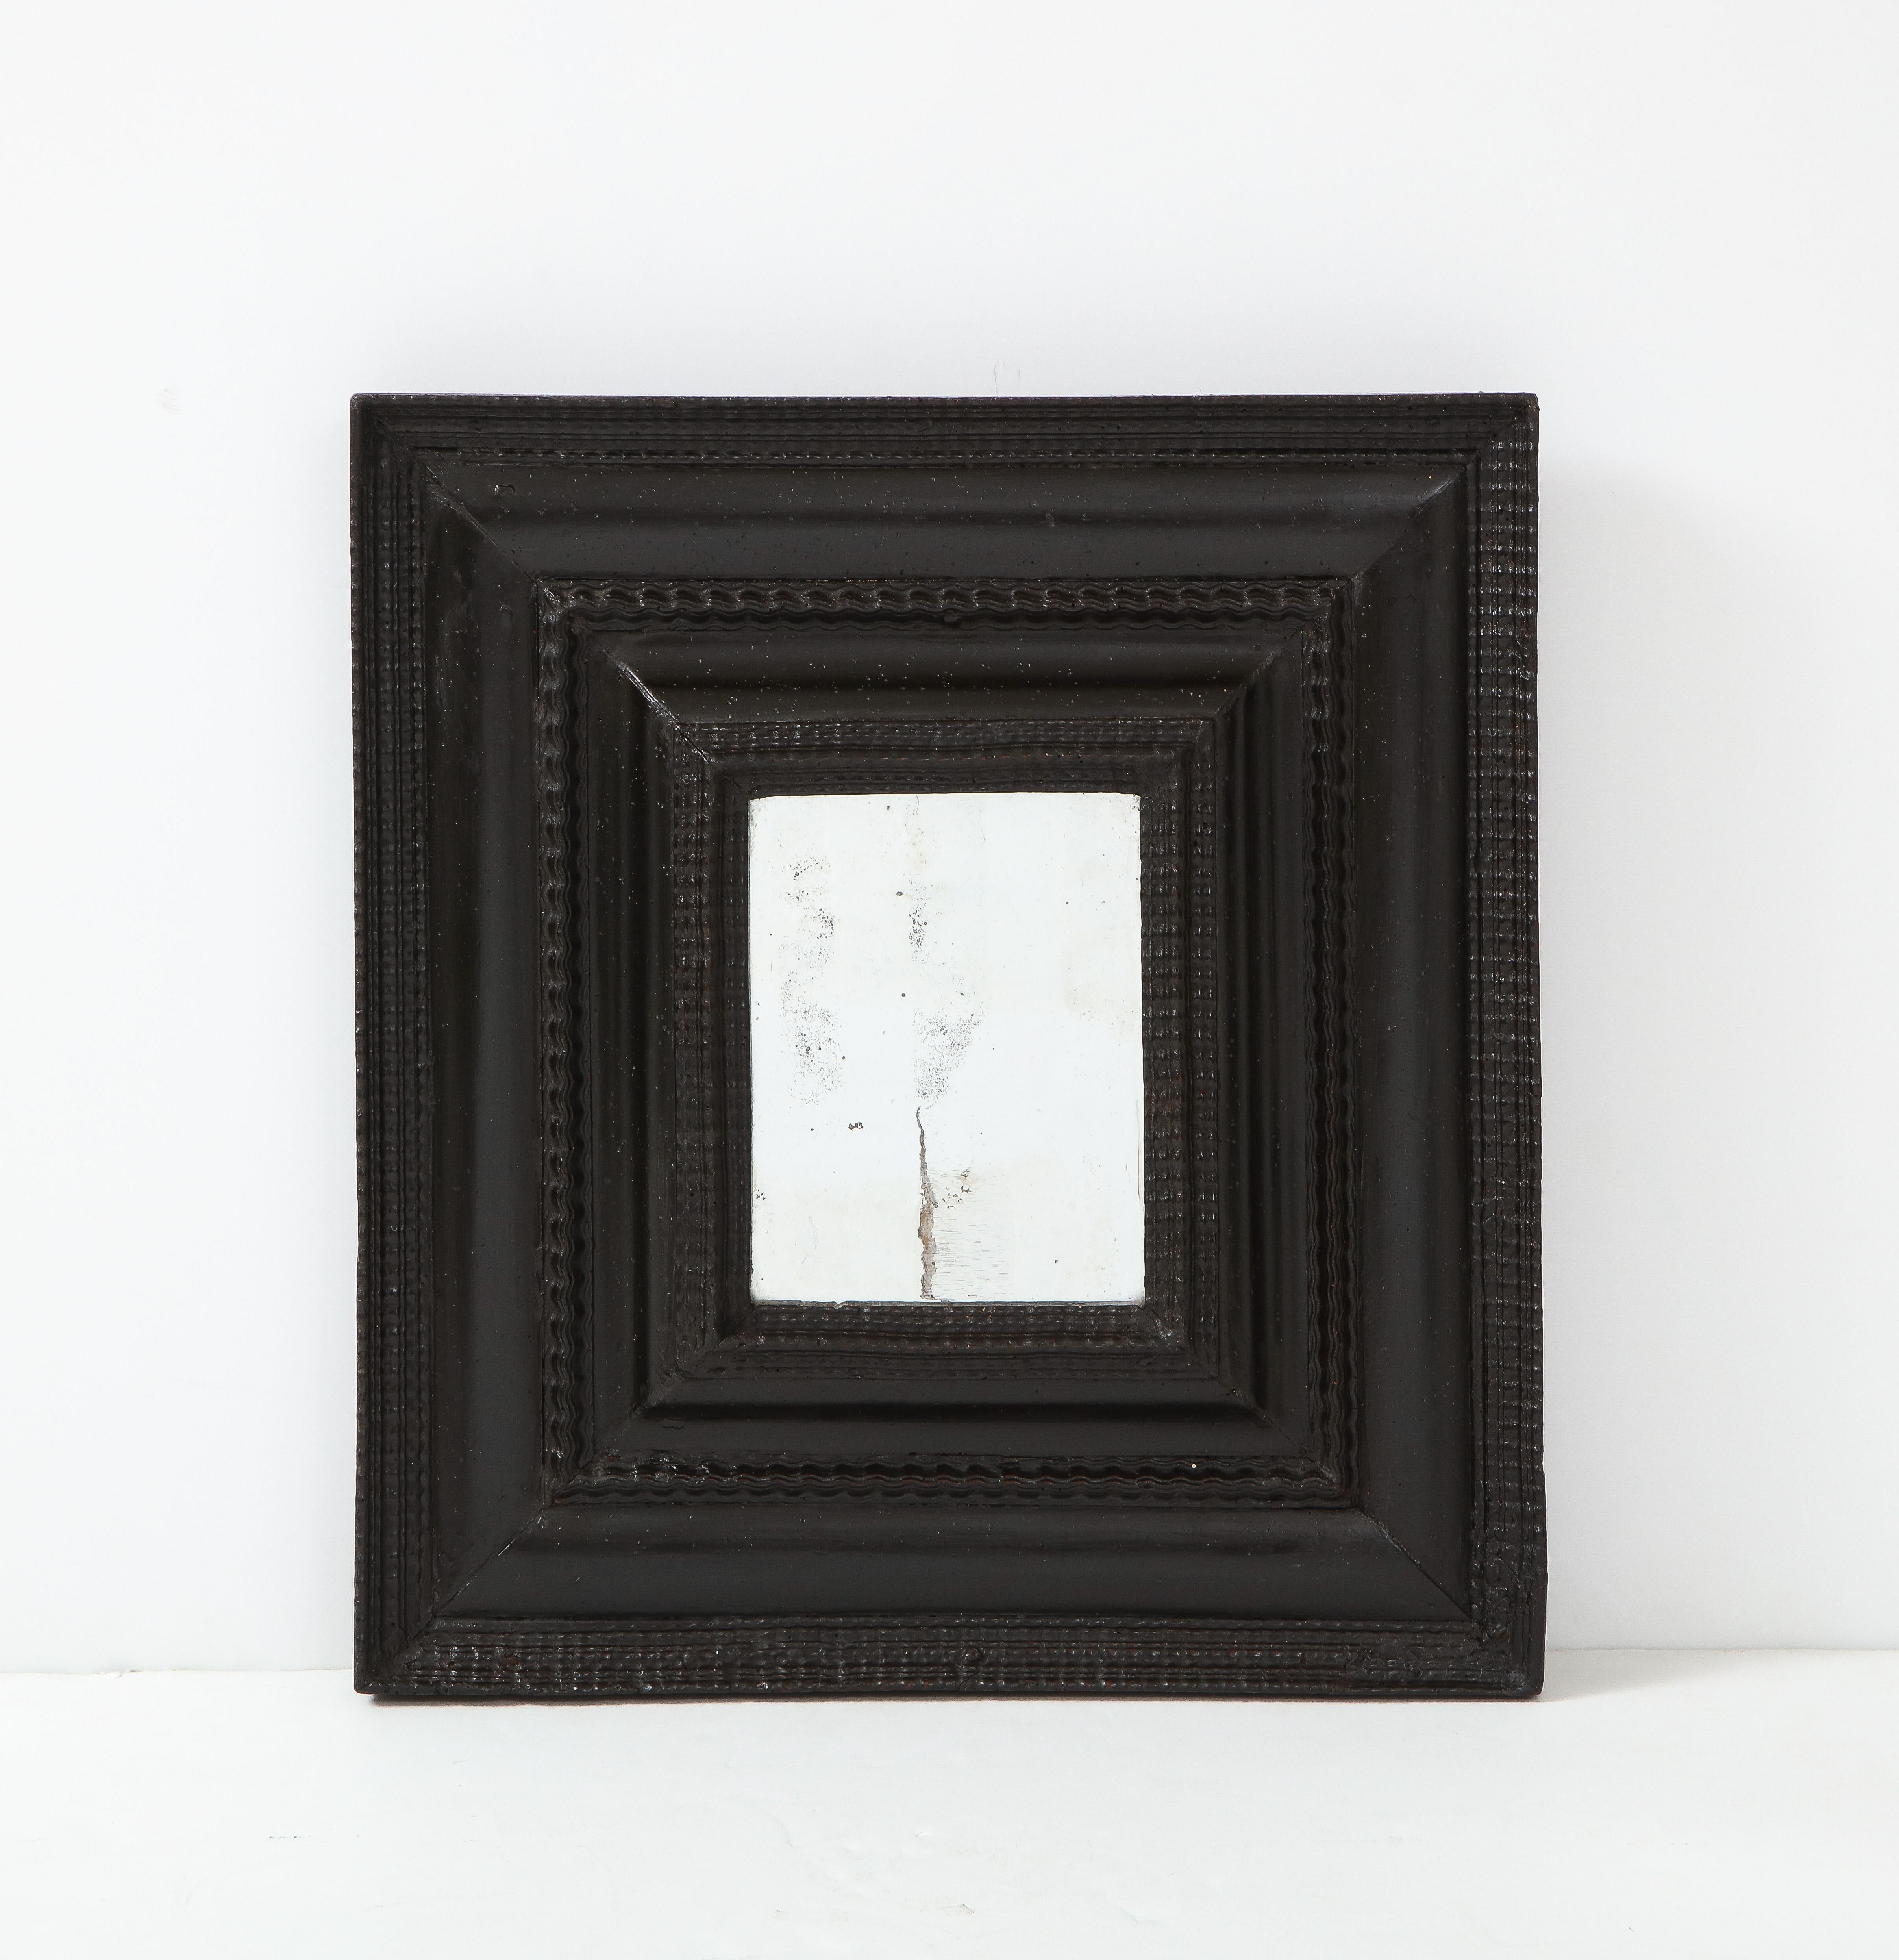 Northern Italian Baroque ebonized walnut guilloché frame, inset with old mercury glass. A bold and dramatic sculptural statement piece for any interior style. 
Northern Italy, circa 1680-1700 
Size: 22 1/2